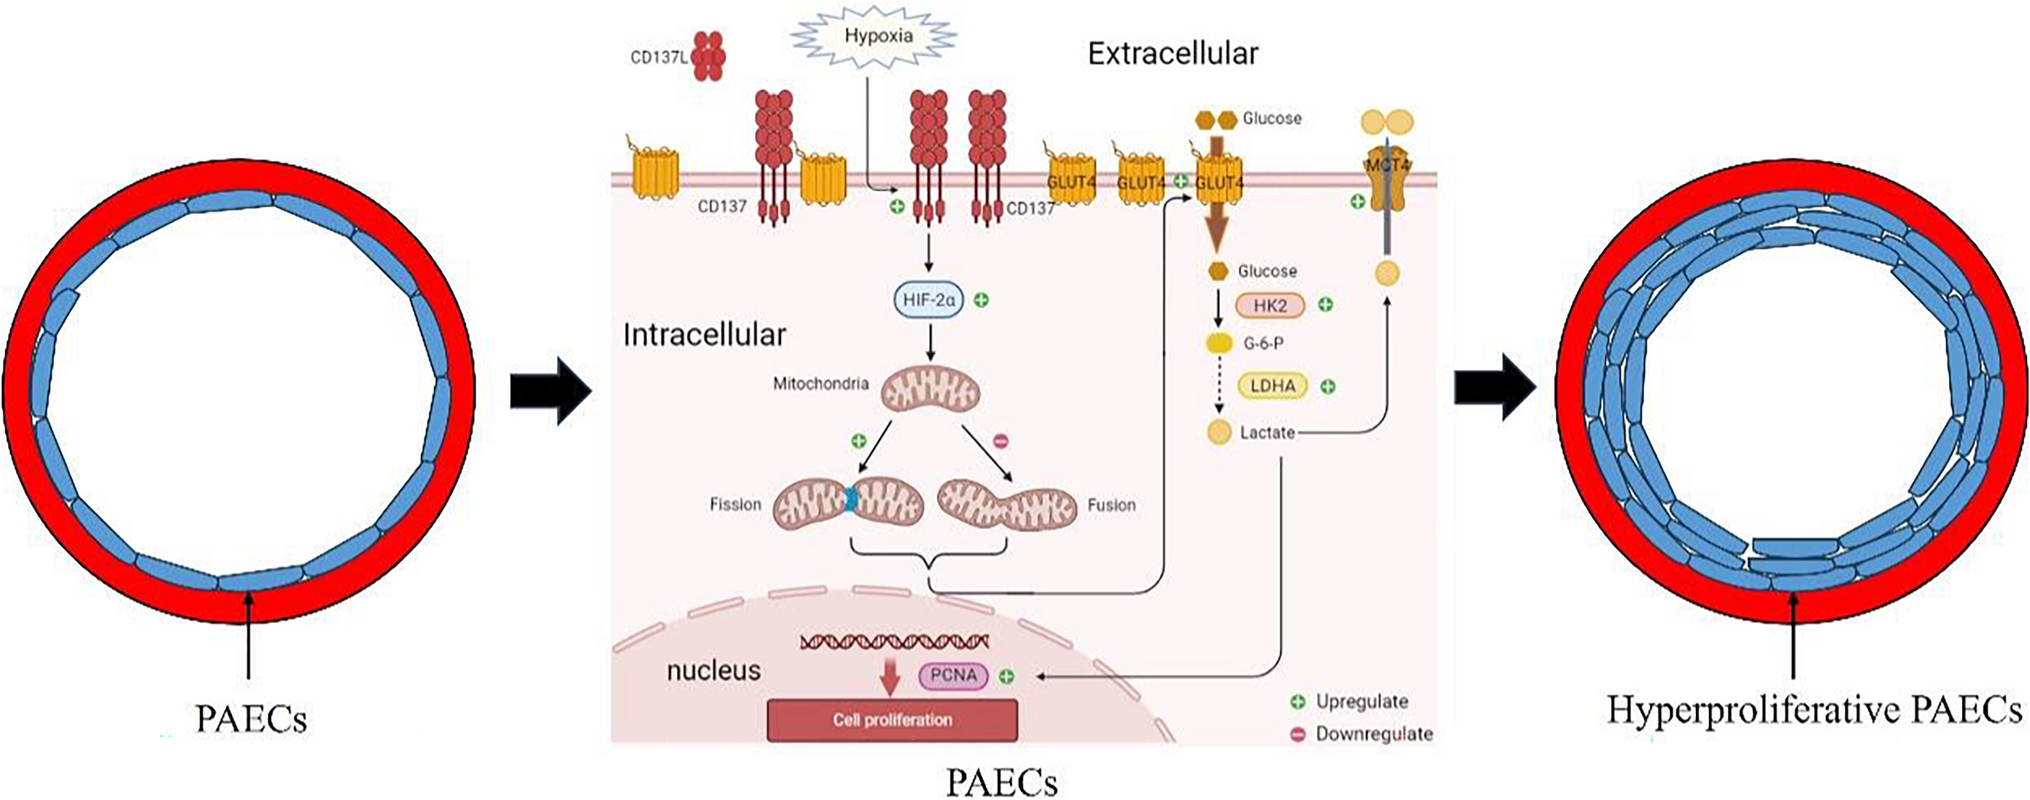 CD137 Signaling Mediates Pulmonary Artery Endothelial Cell Proliferation Under Hypoxia By Regulating Mitochondrial Dynamics